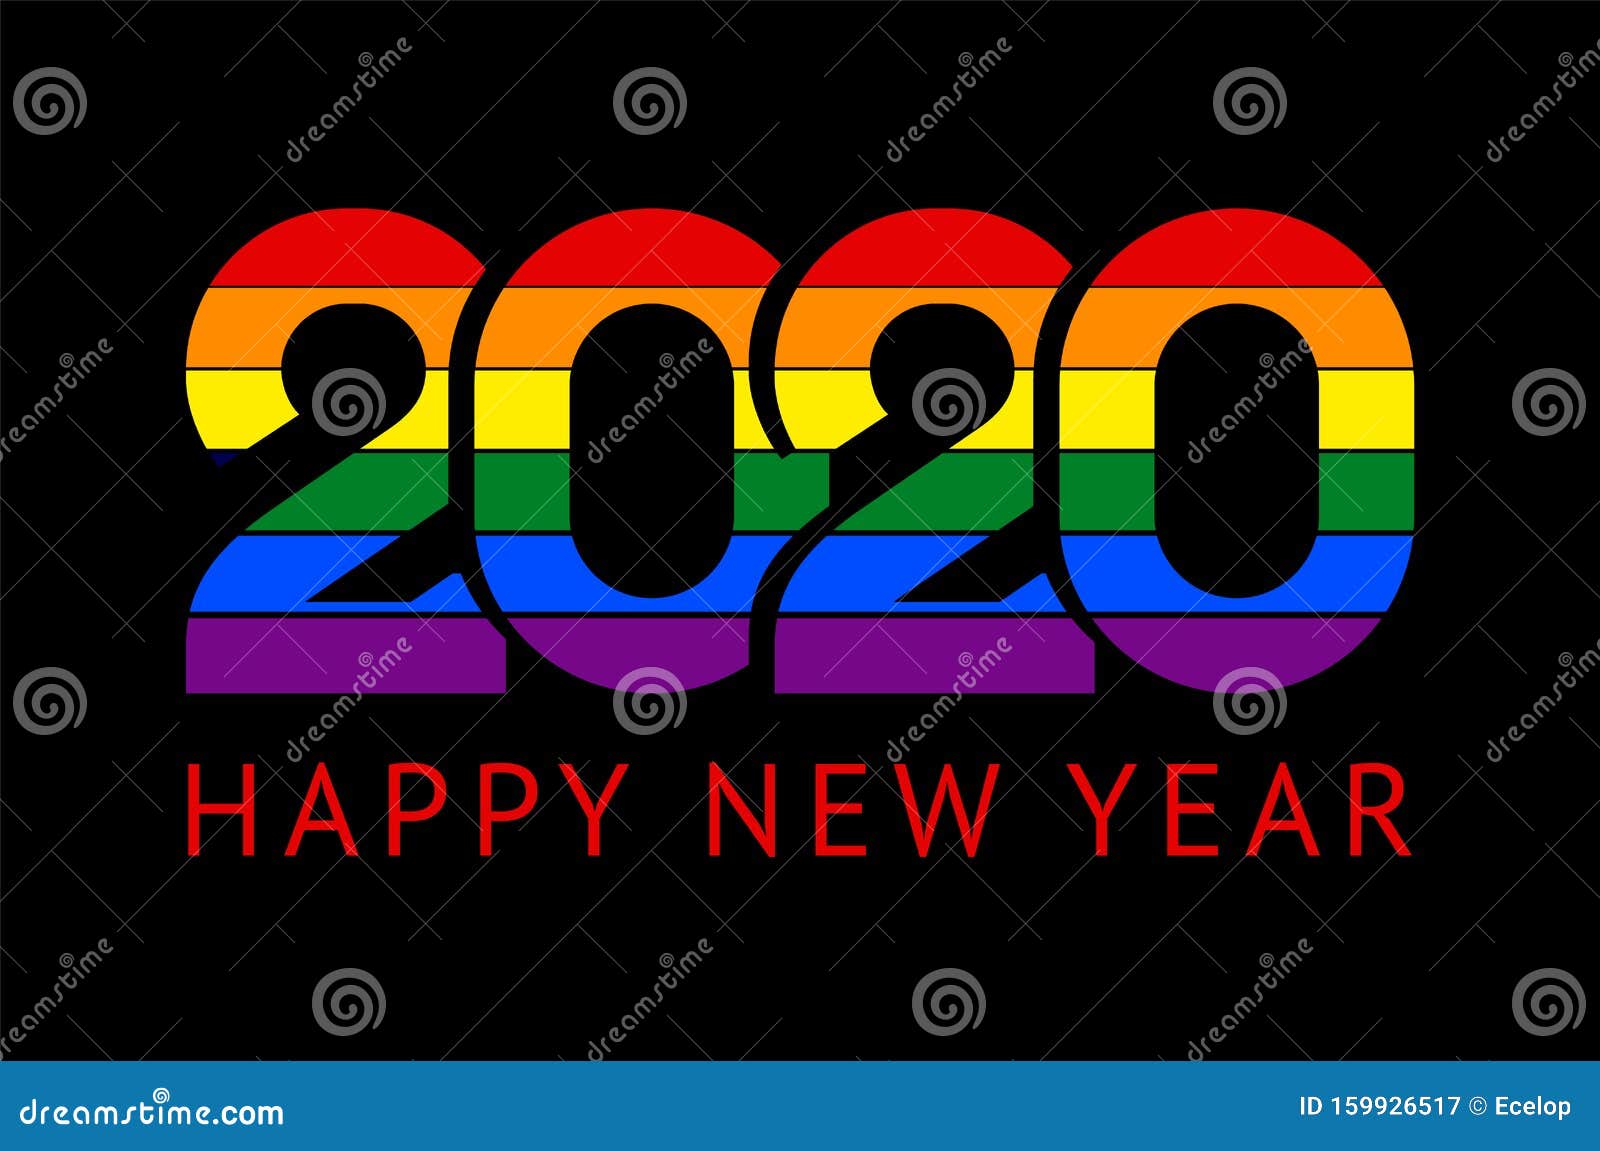 Happy New Year Greeting Card Design. 2020 Chinese Year of Rat ...